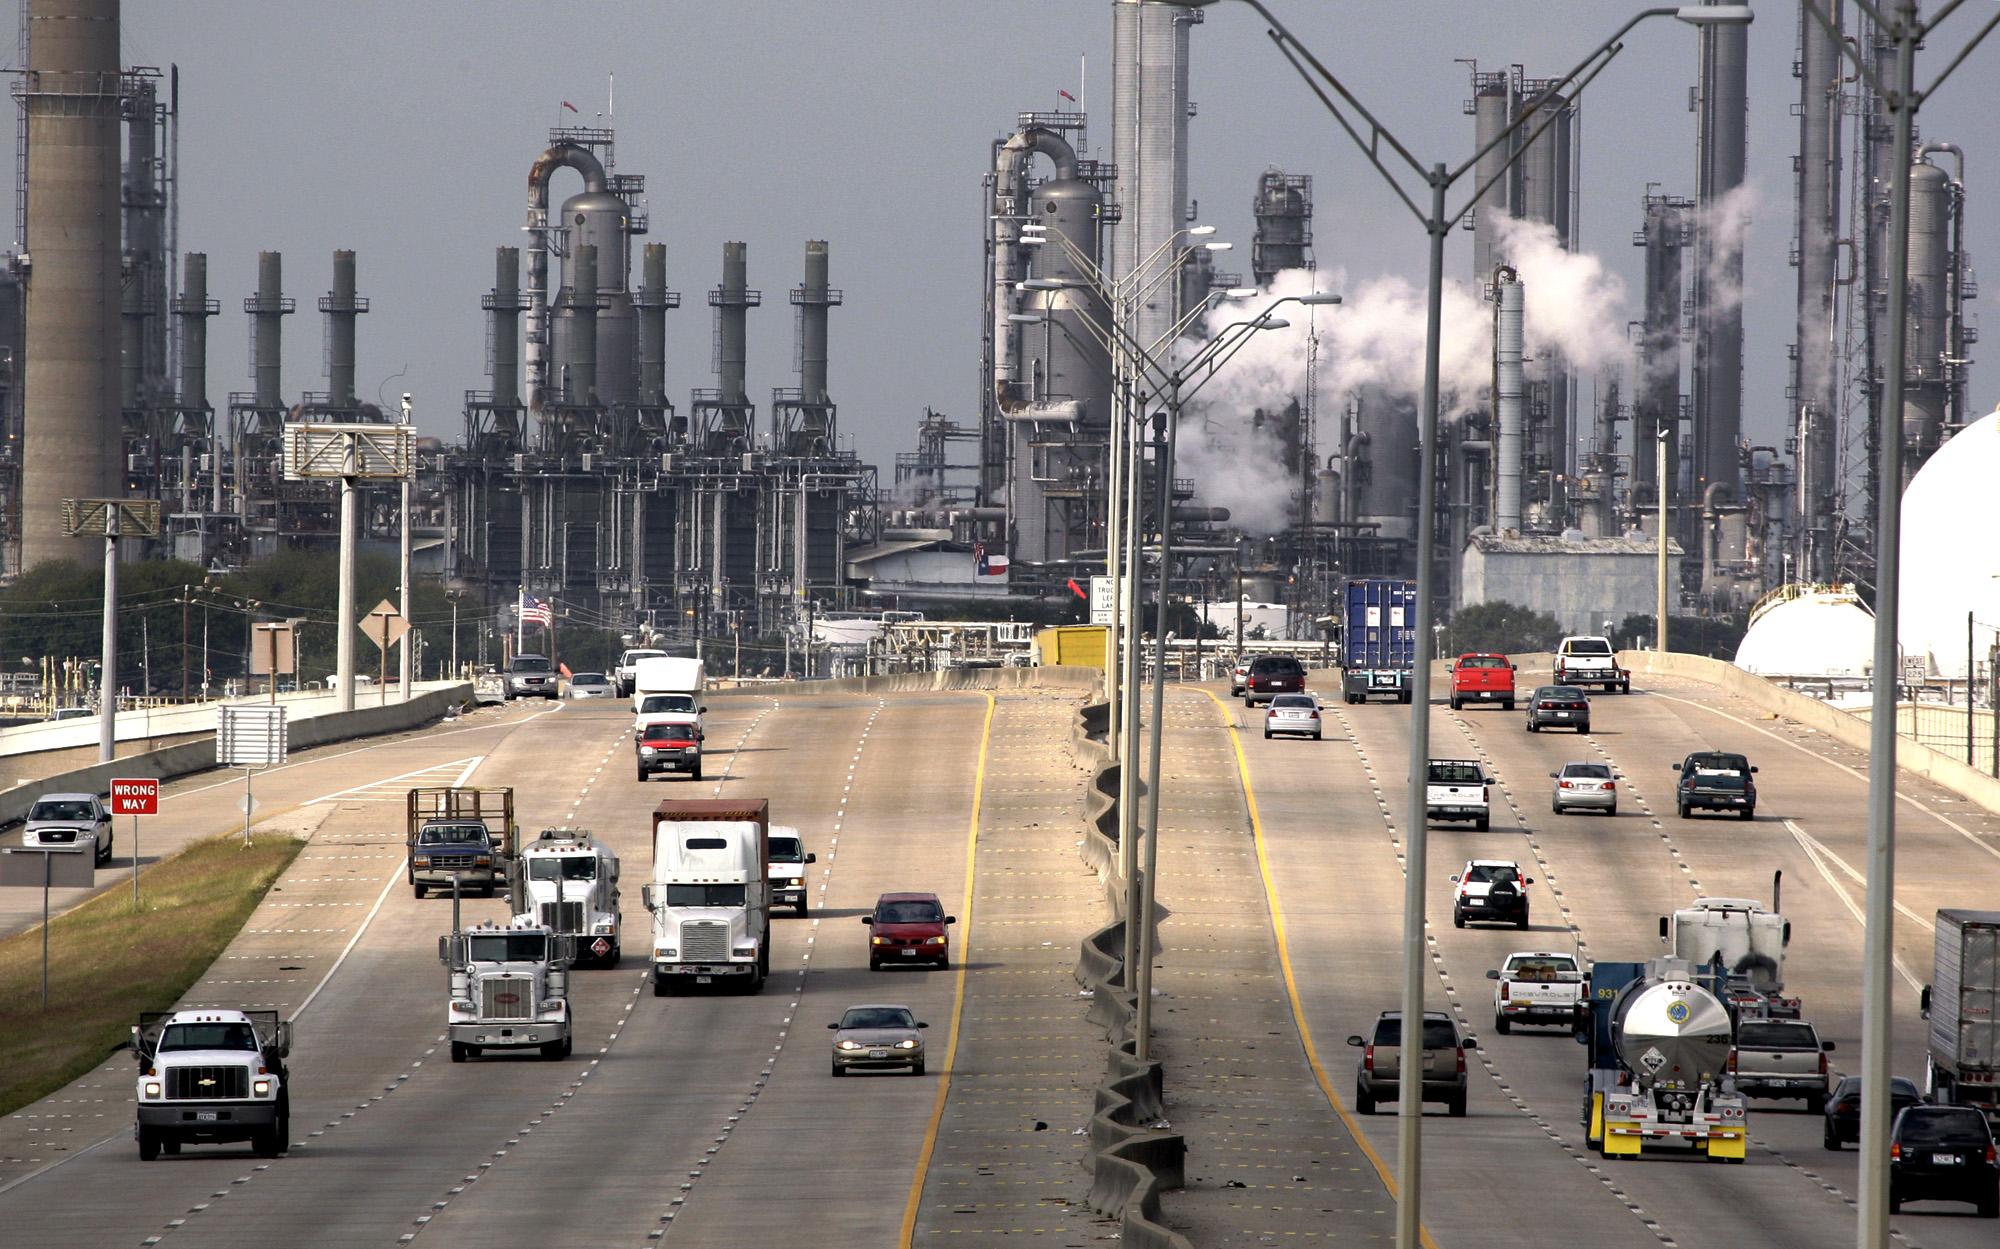 U.S. authorized the sale of Deer Park refinery